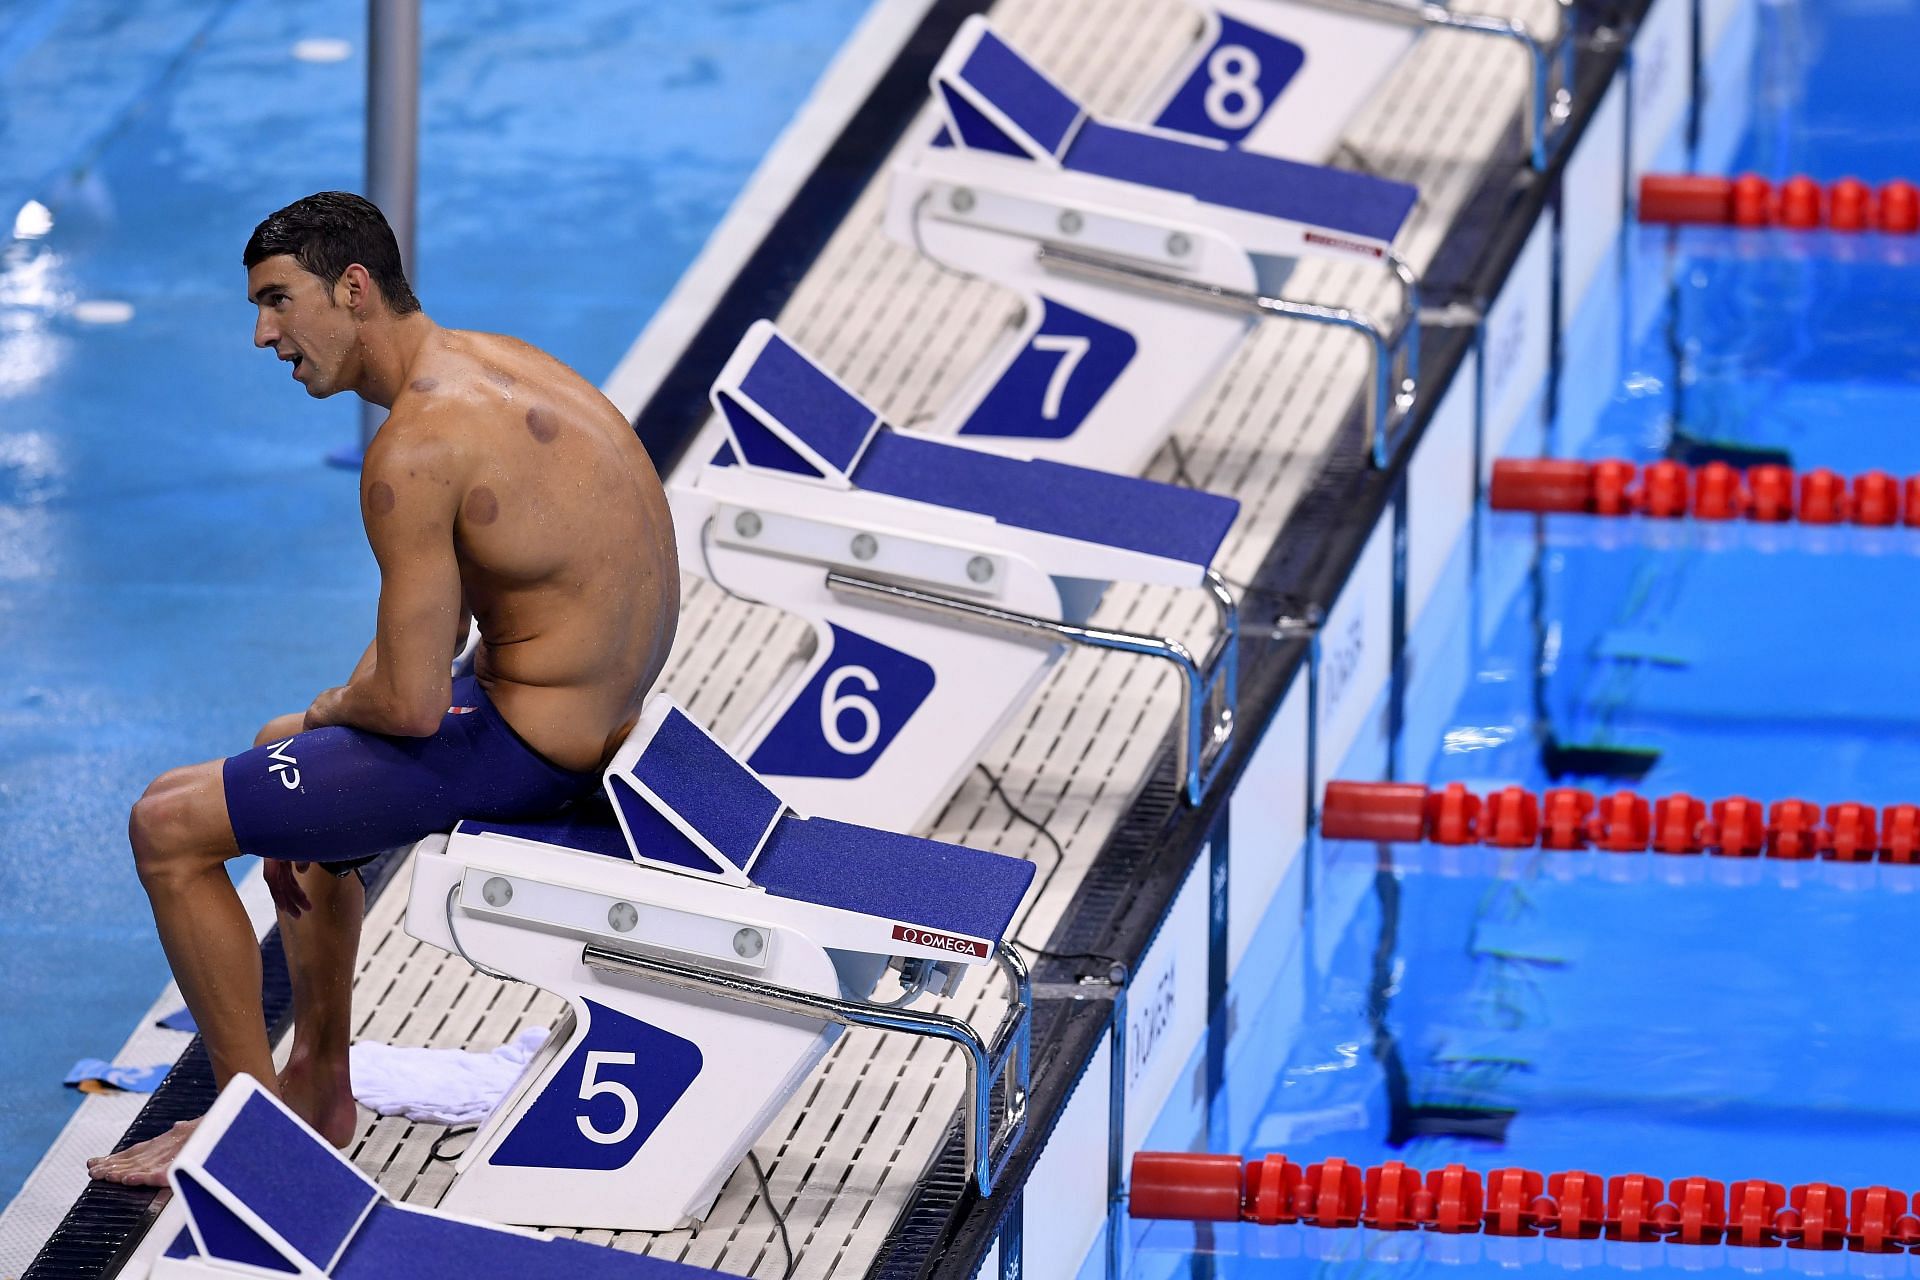 Michael Phelps with visible cupping marks (Image via David Ramos/Getty Images)